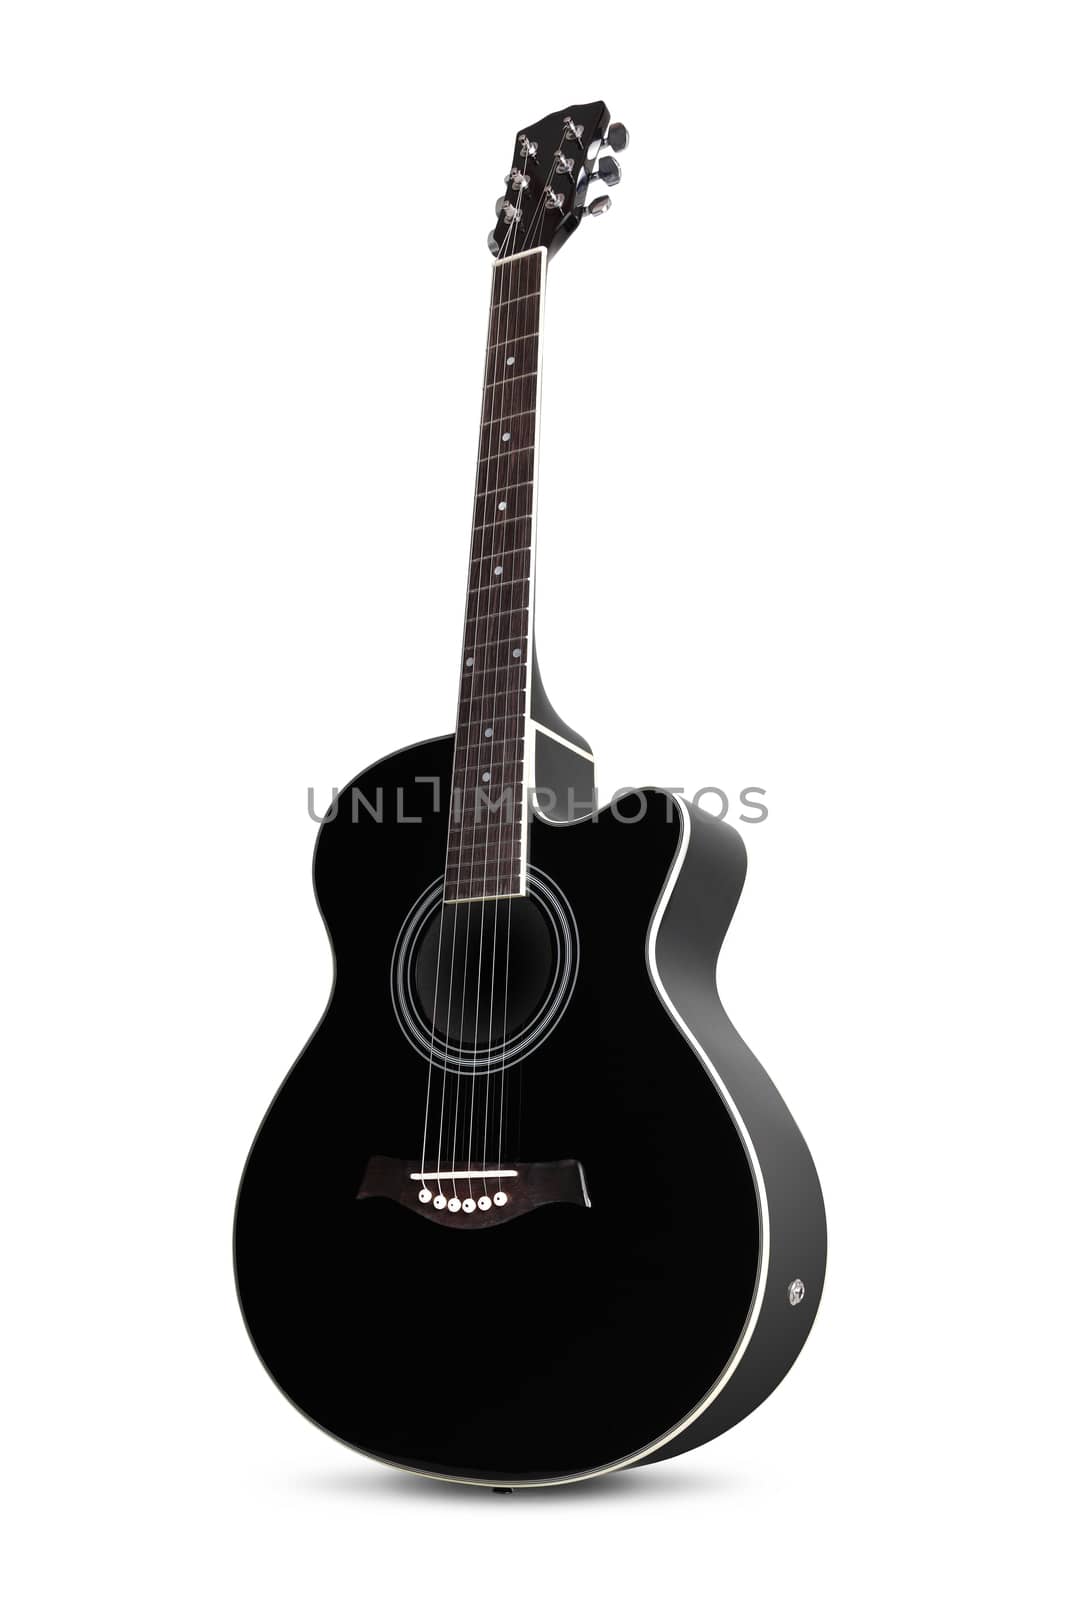 A front and side view of a black guitar on white